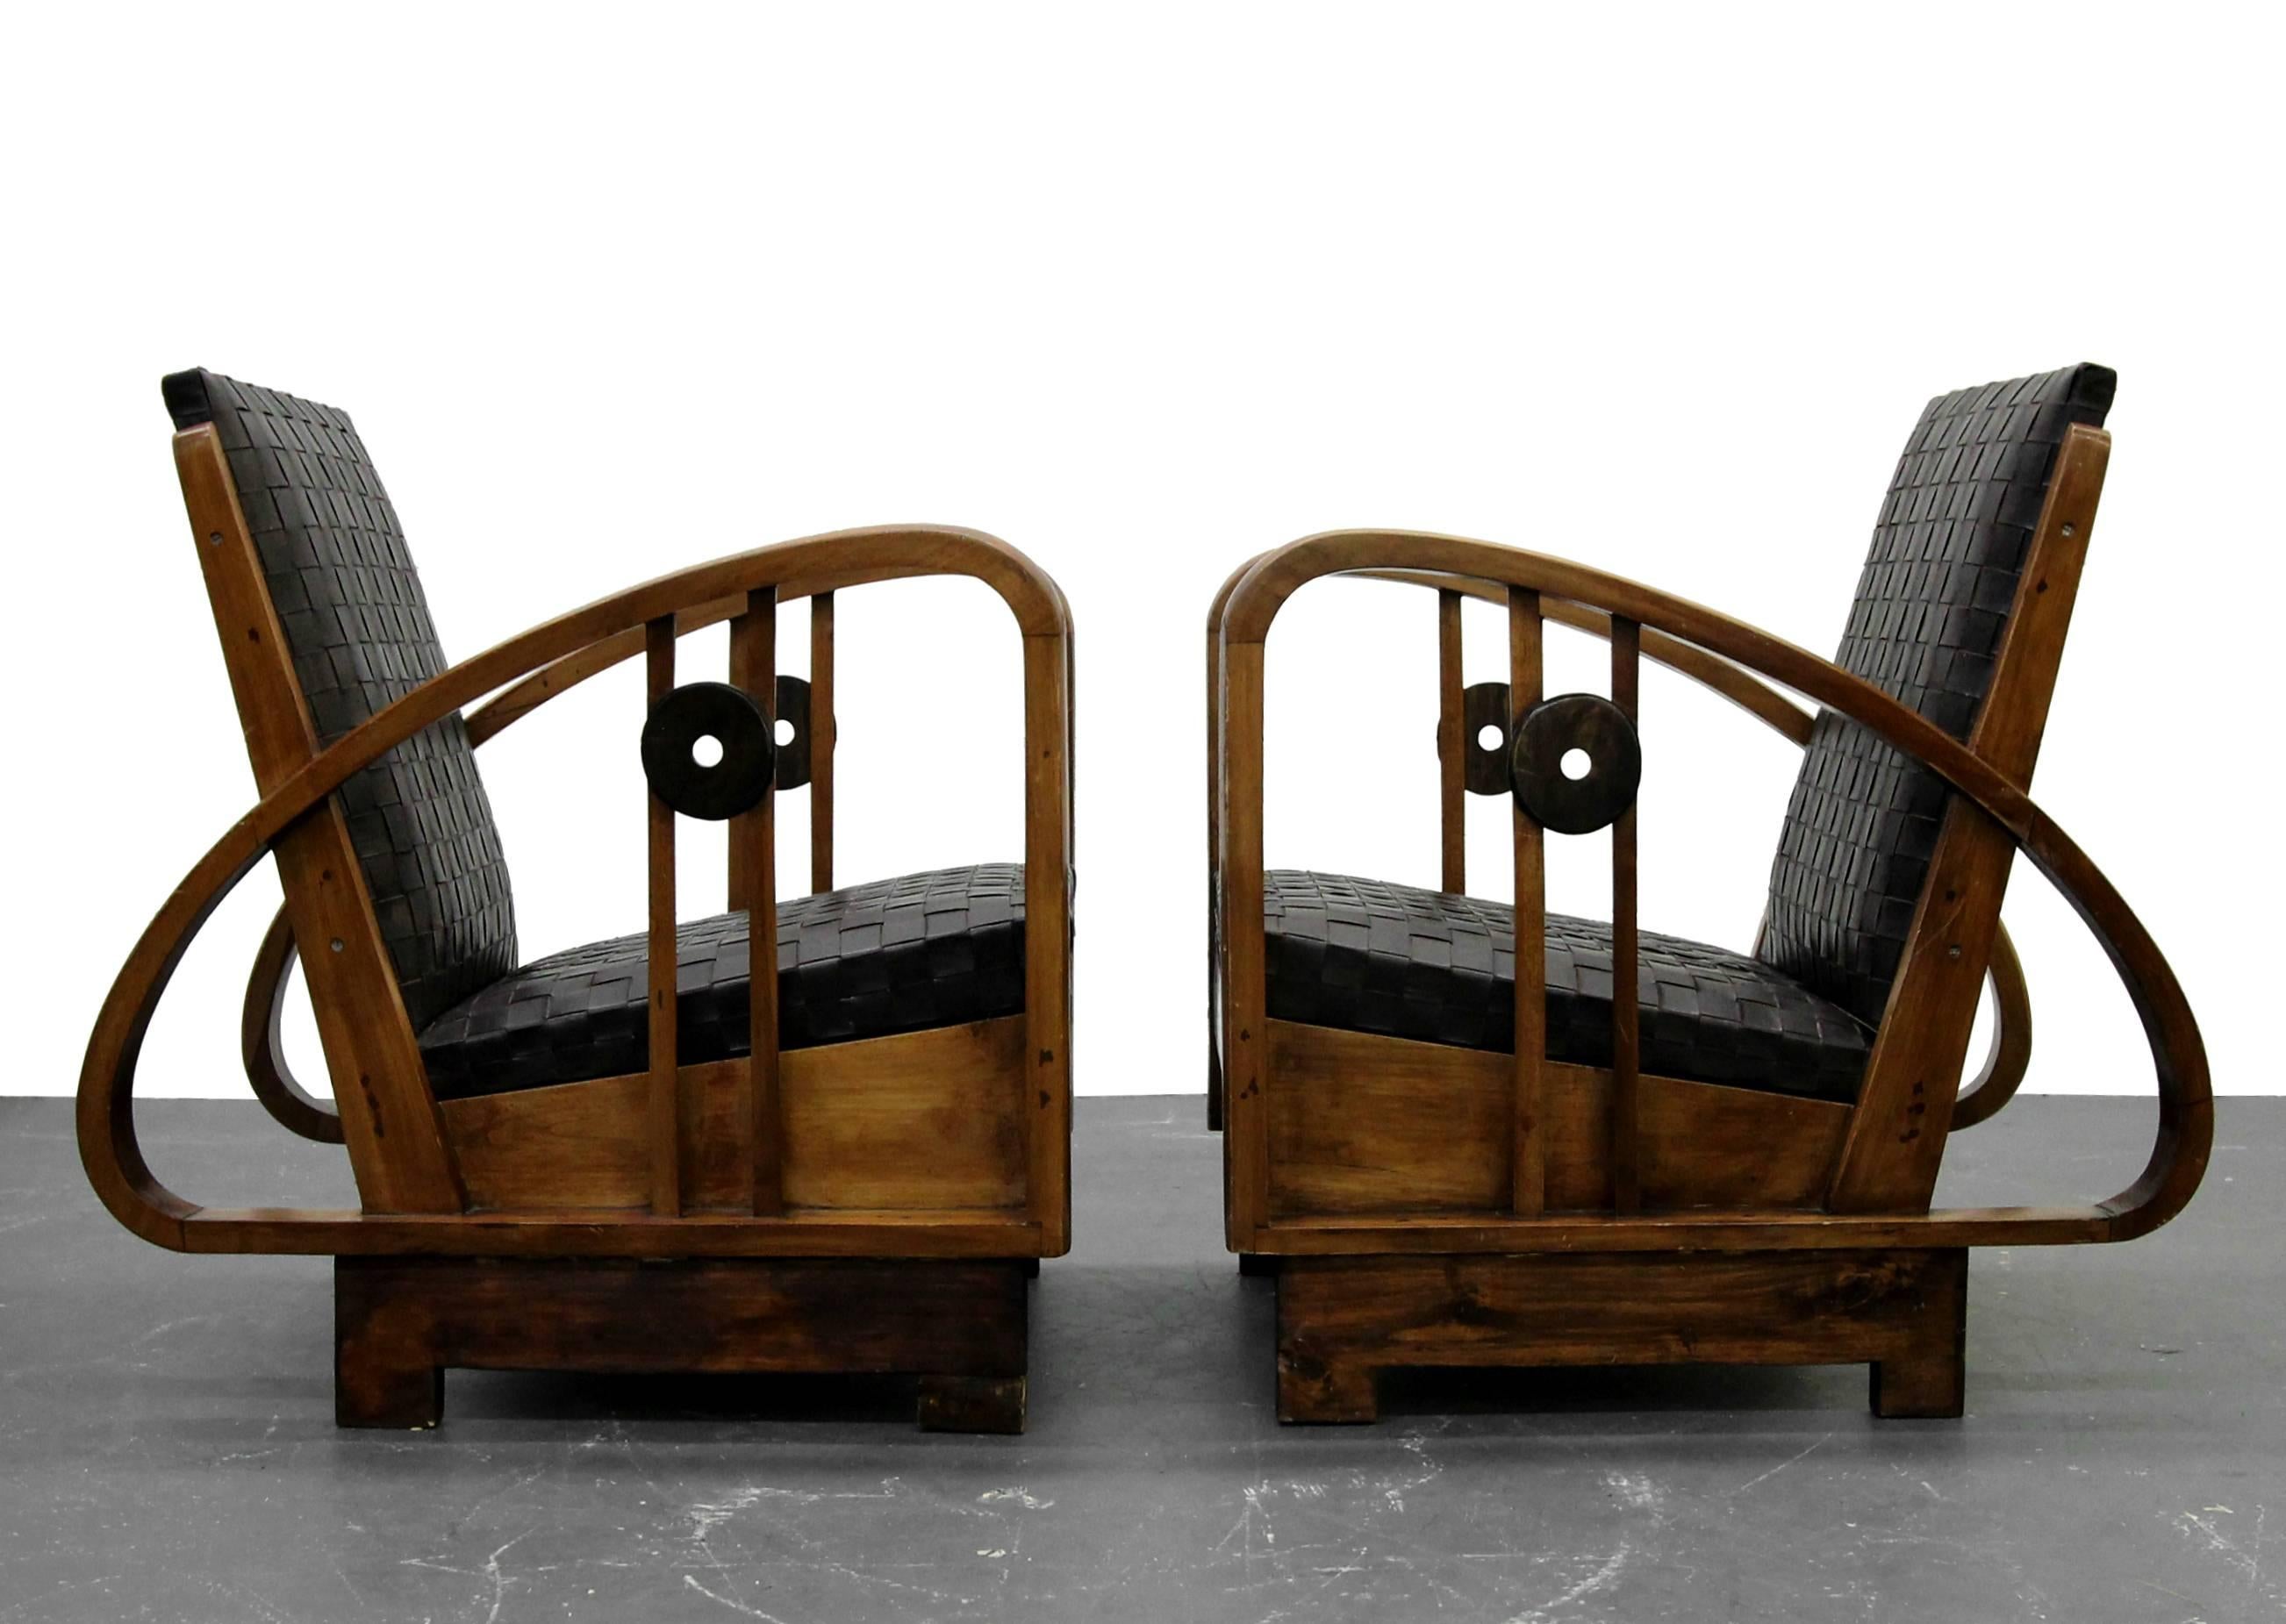 Hand-Woven Pair of Antique French Art Deco Bentwood Lounge Chairs with Woven Leather